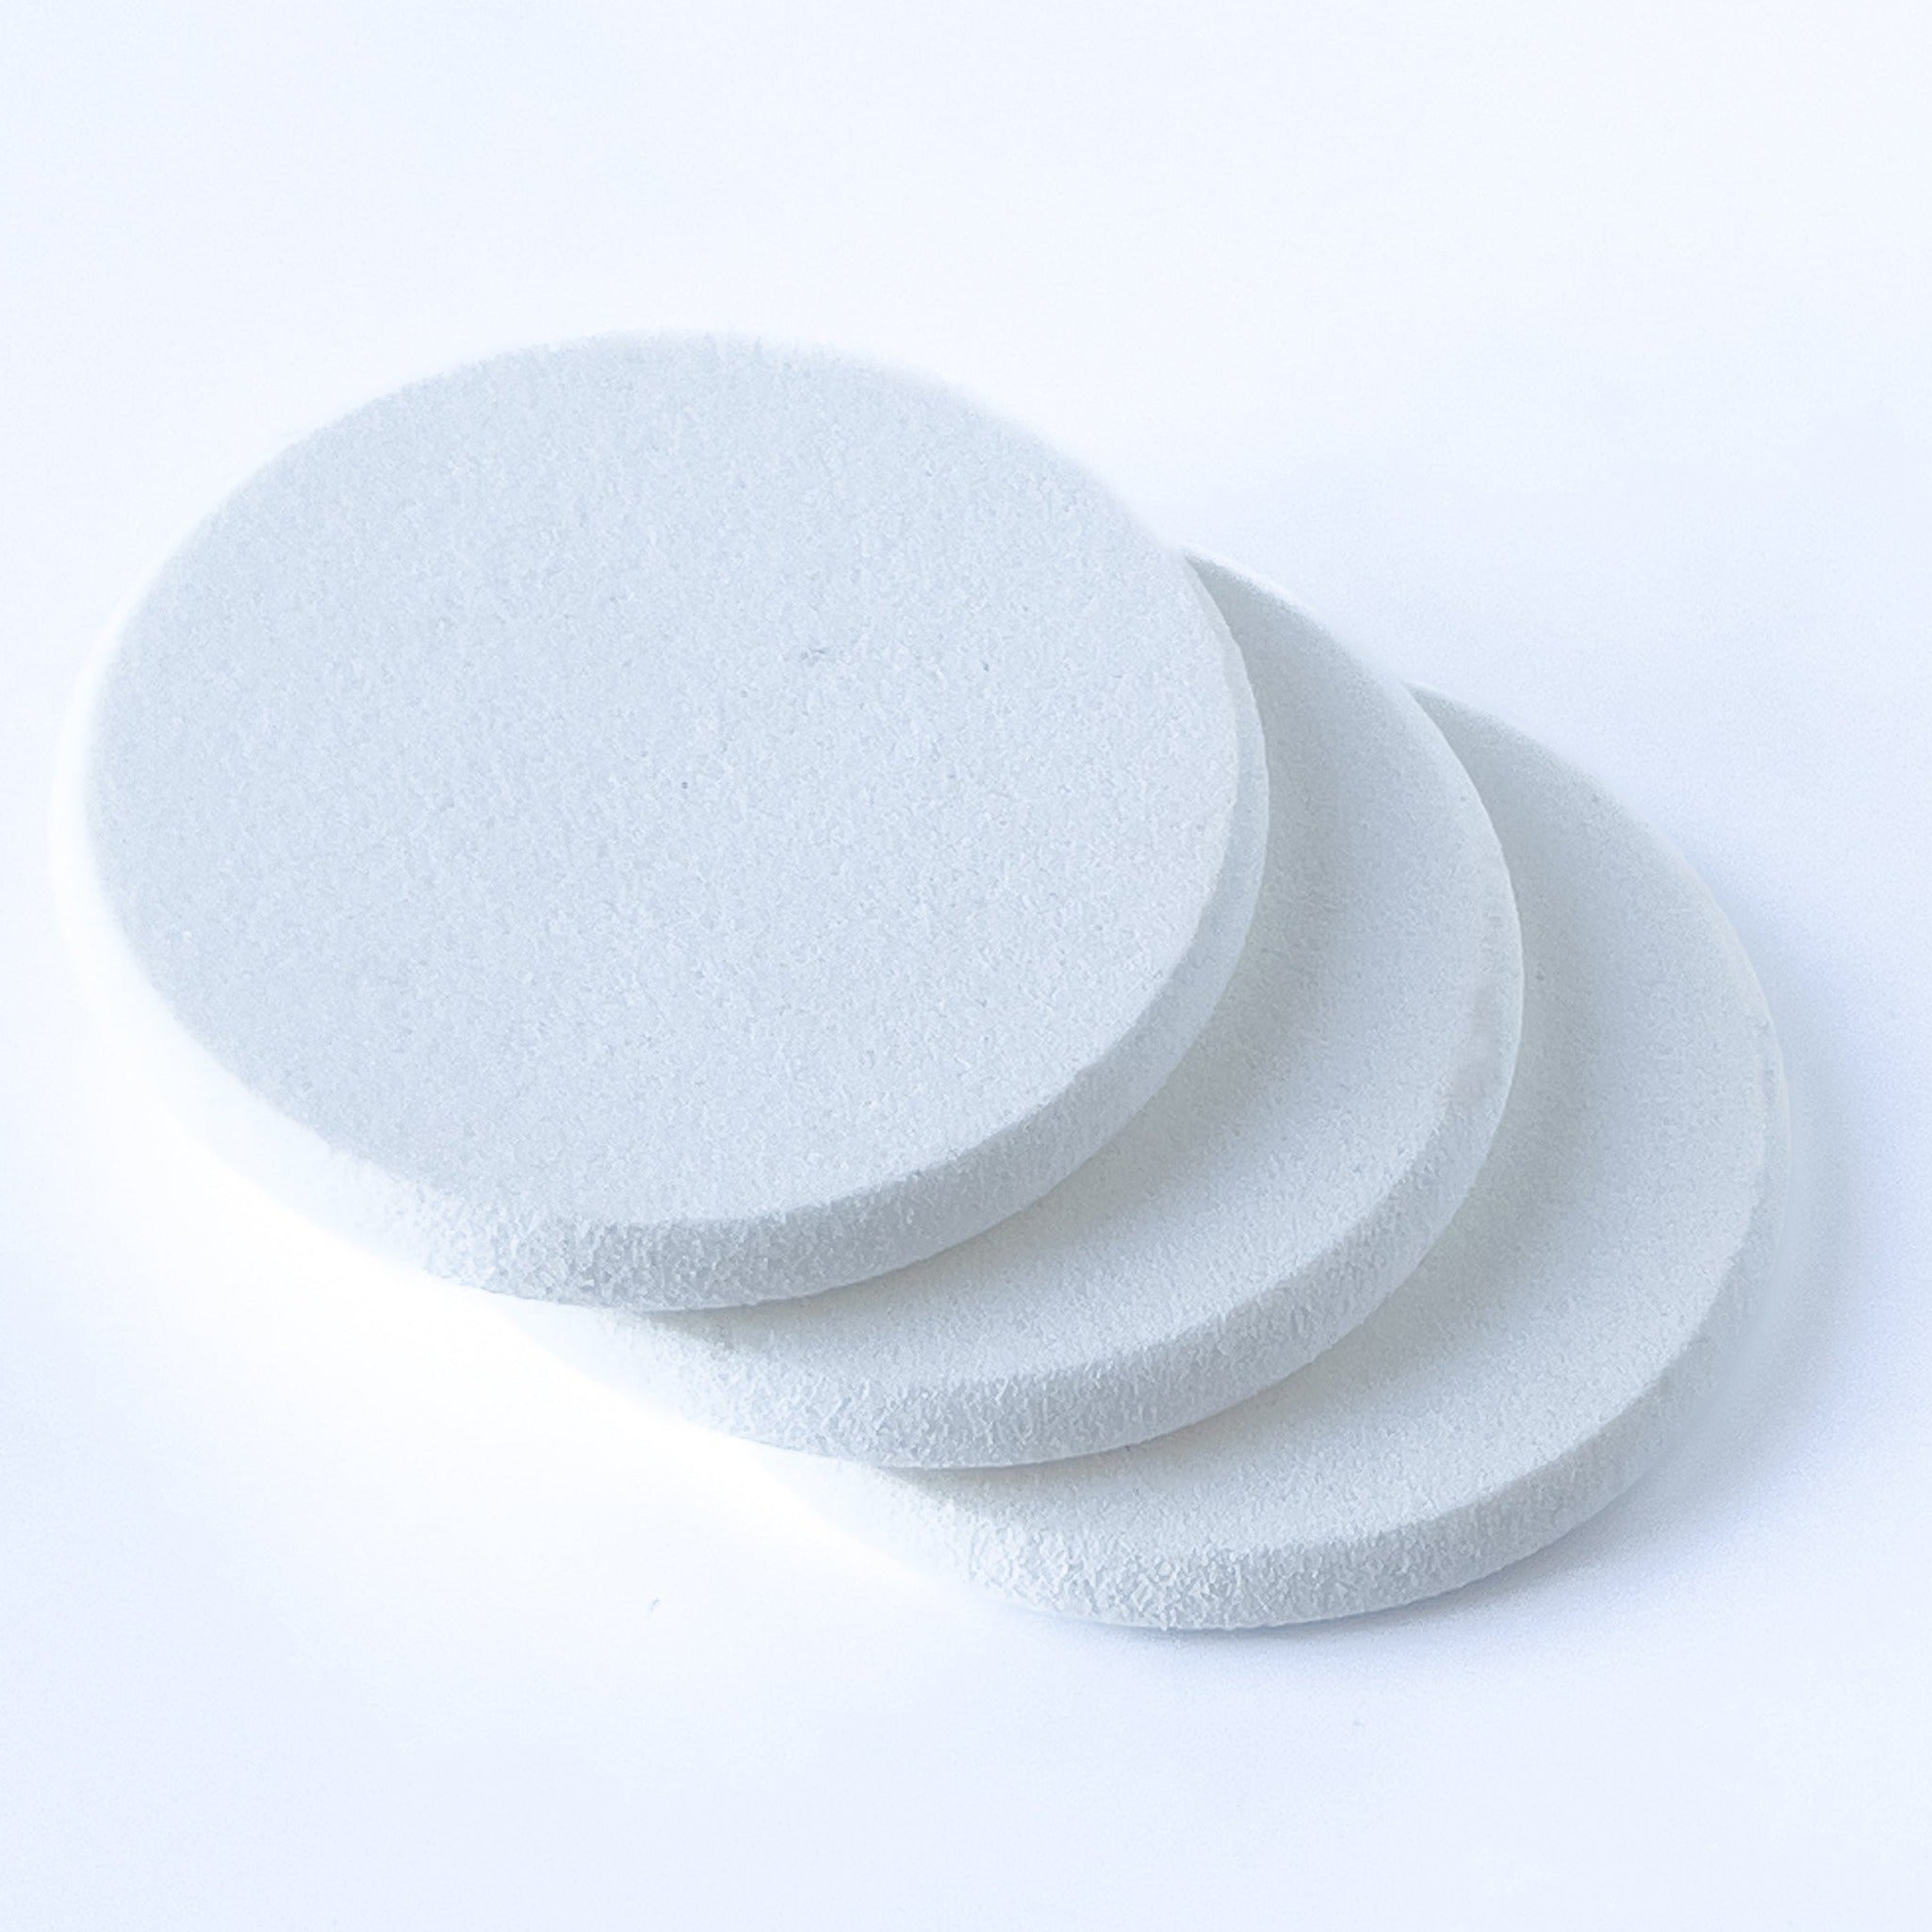 3 round, white pads are shown stacked